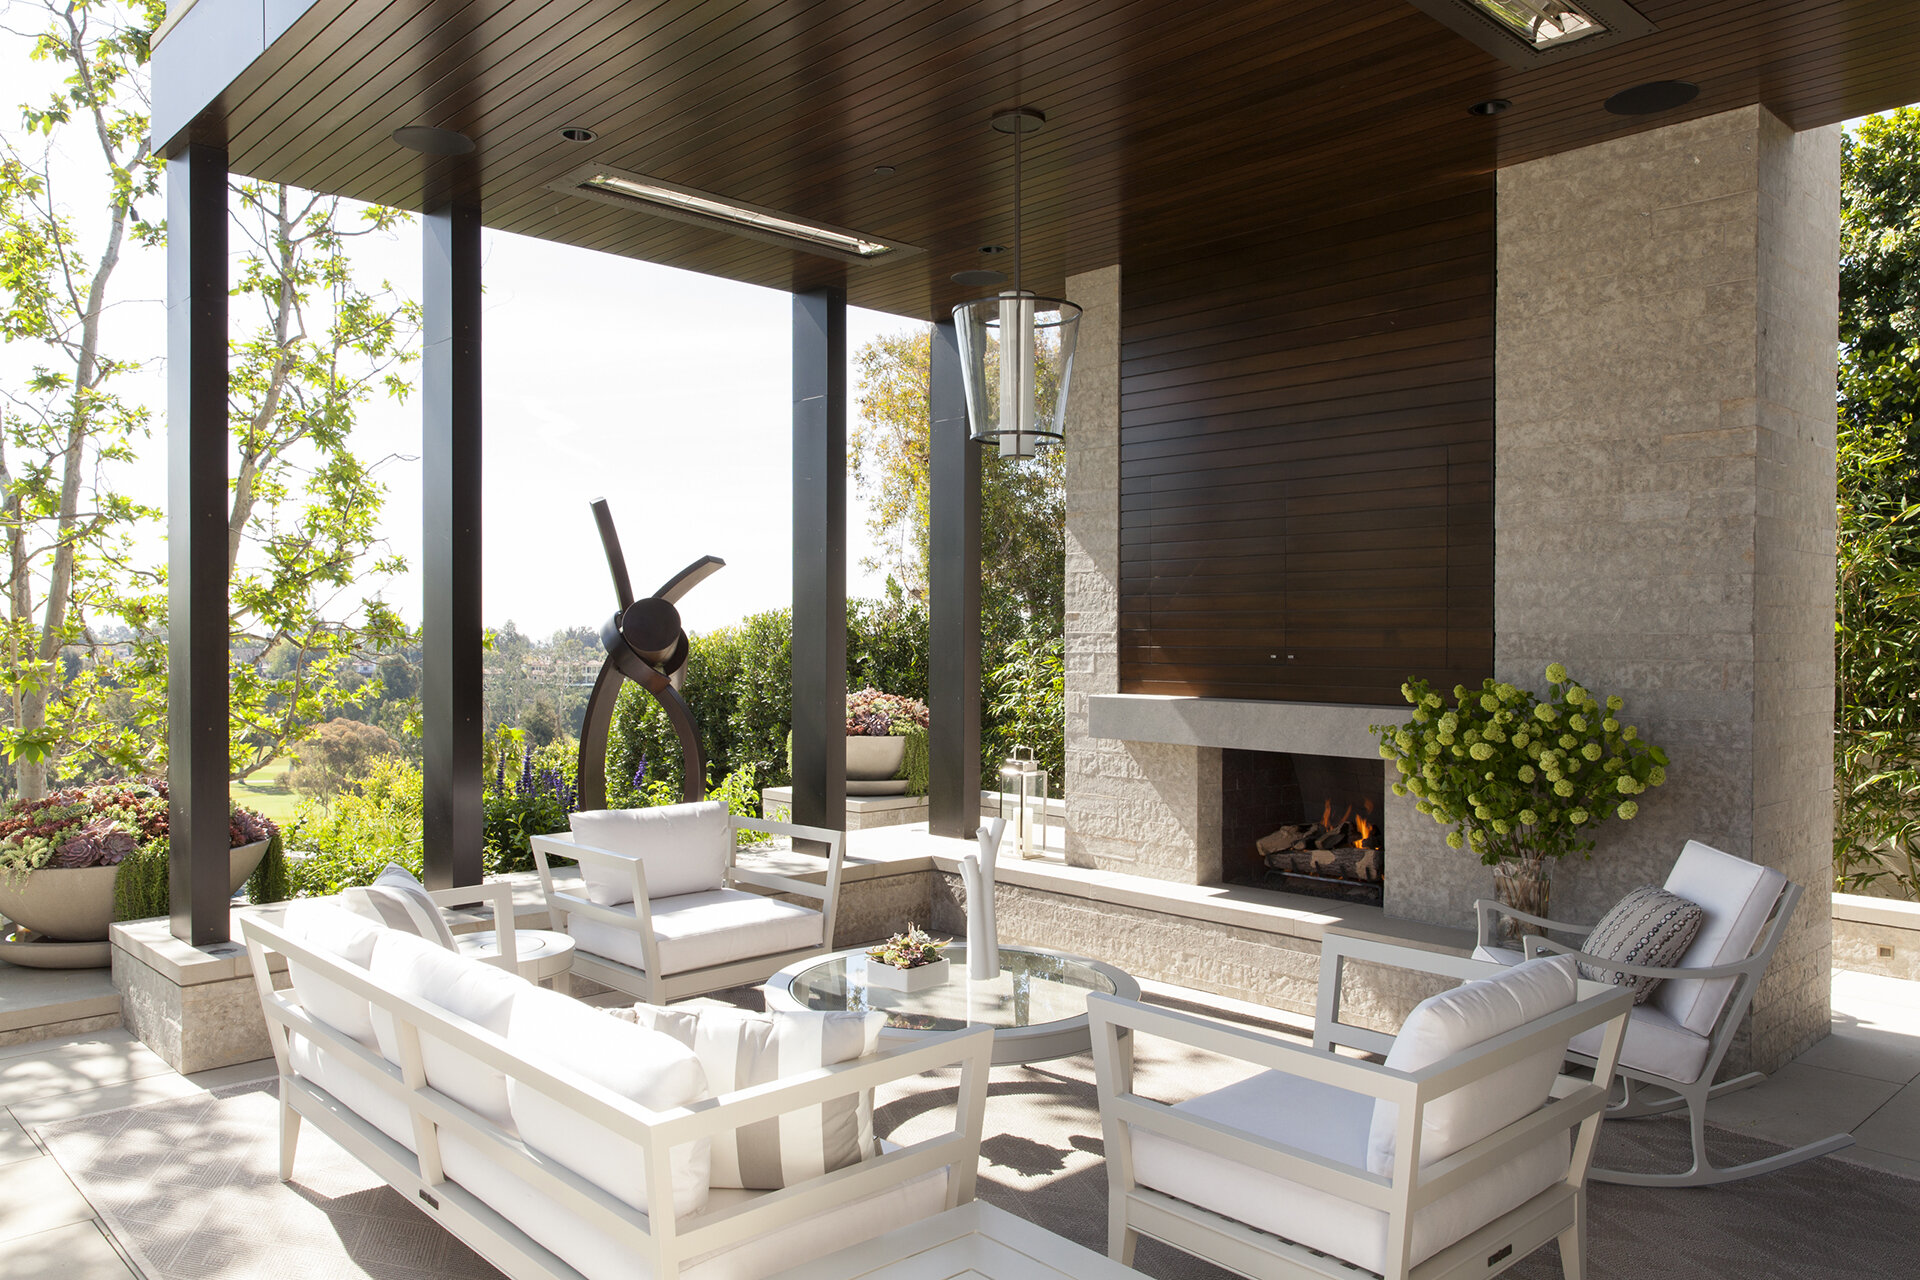  Luxury contemporary modern highest quality builder and general contractor custom home in the Pacific Palisades neighborhood of Los Angeles featuring architectural residence with beautiful landscaped patio and outdoor living room published in Luxe Ma